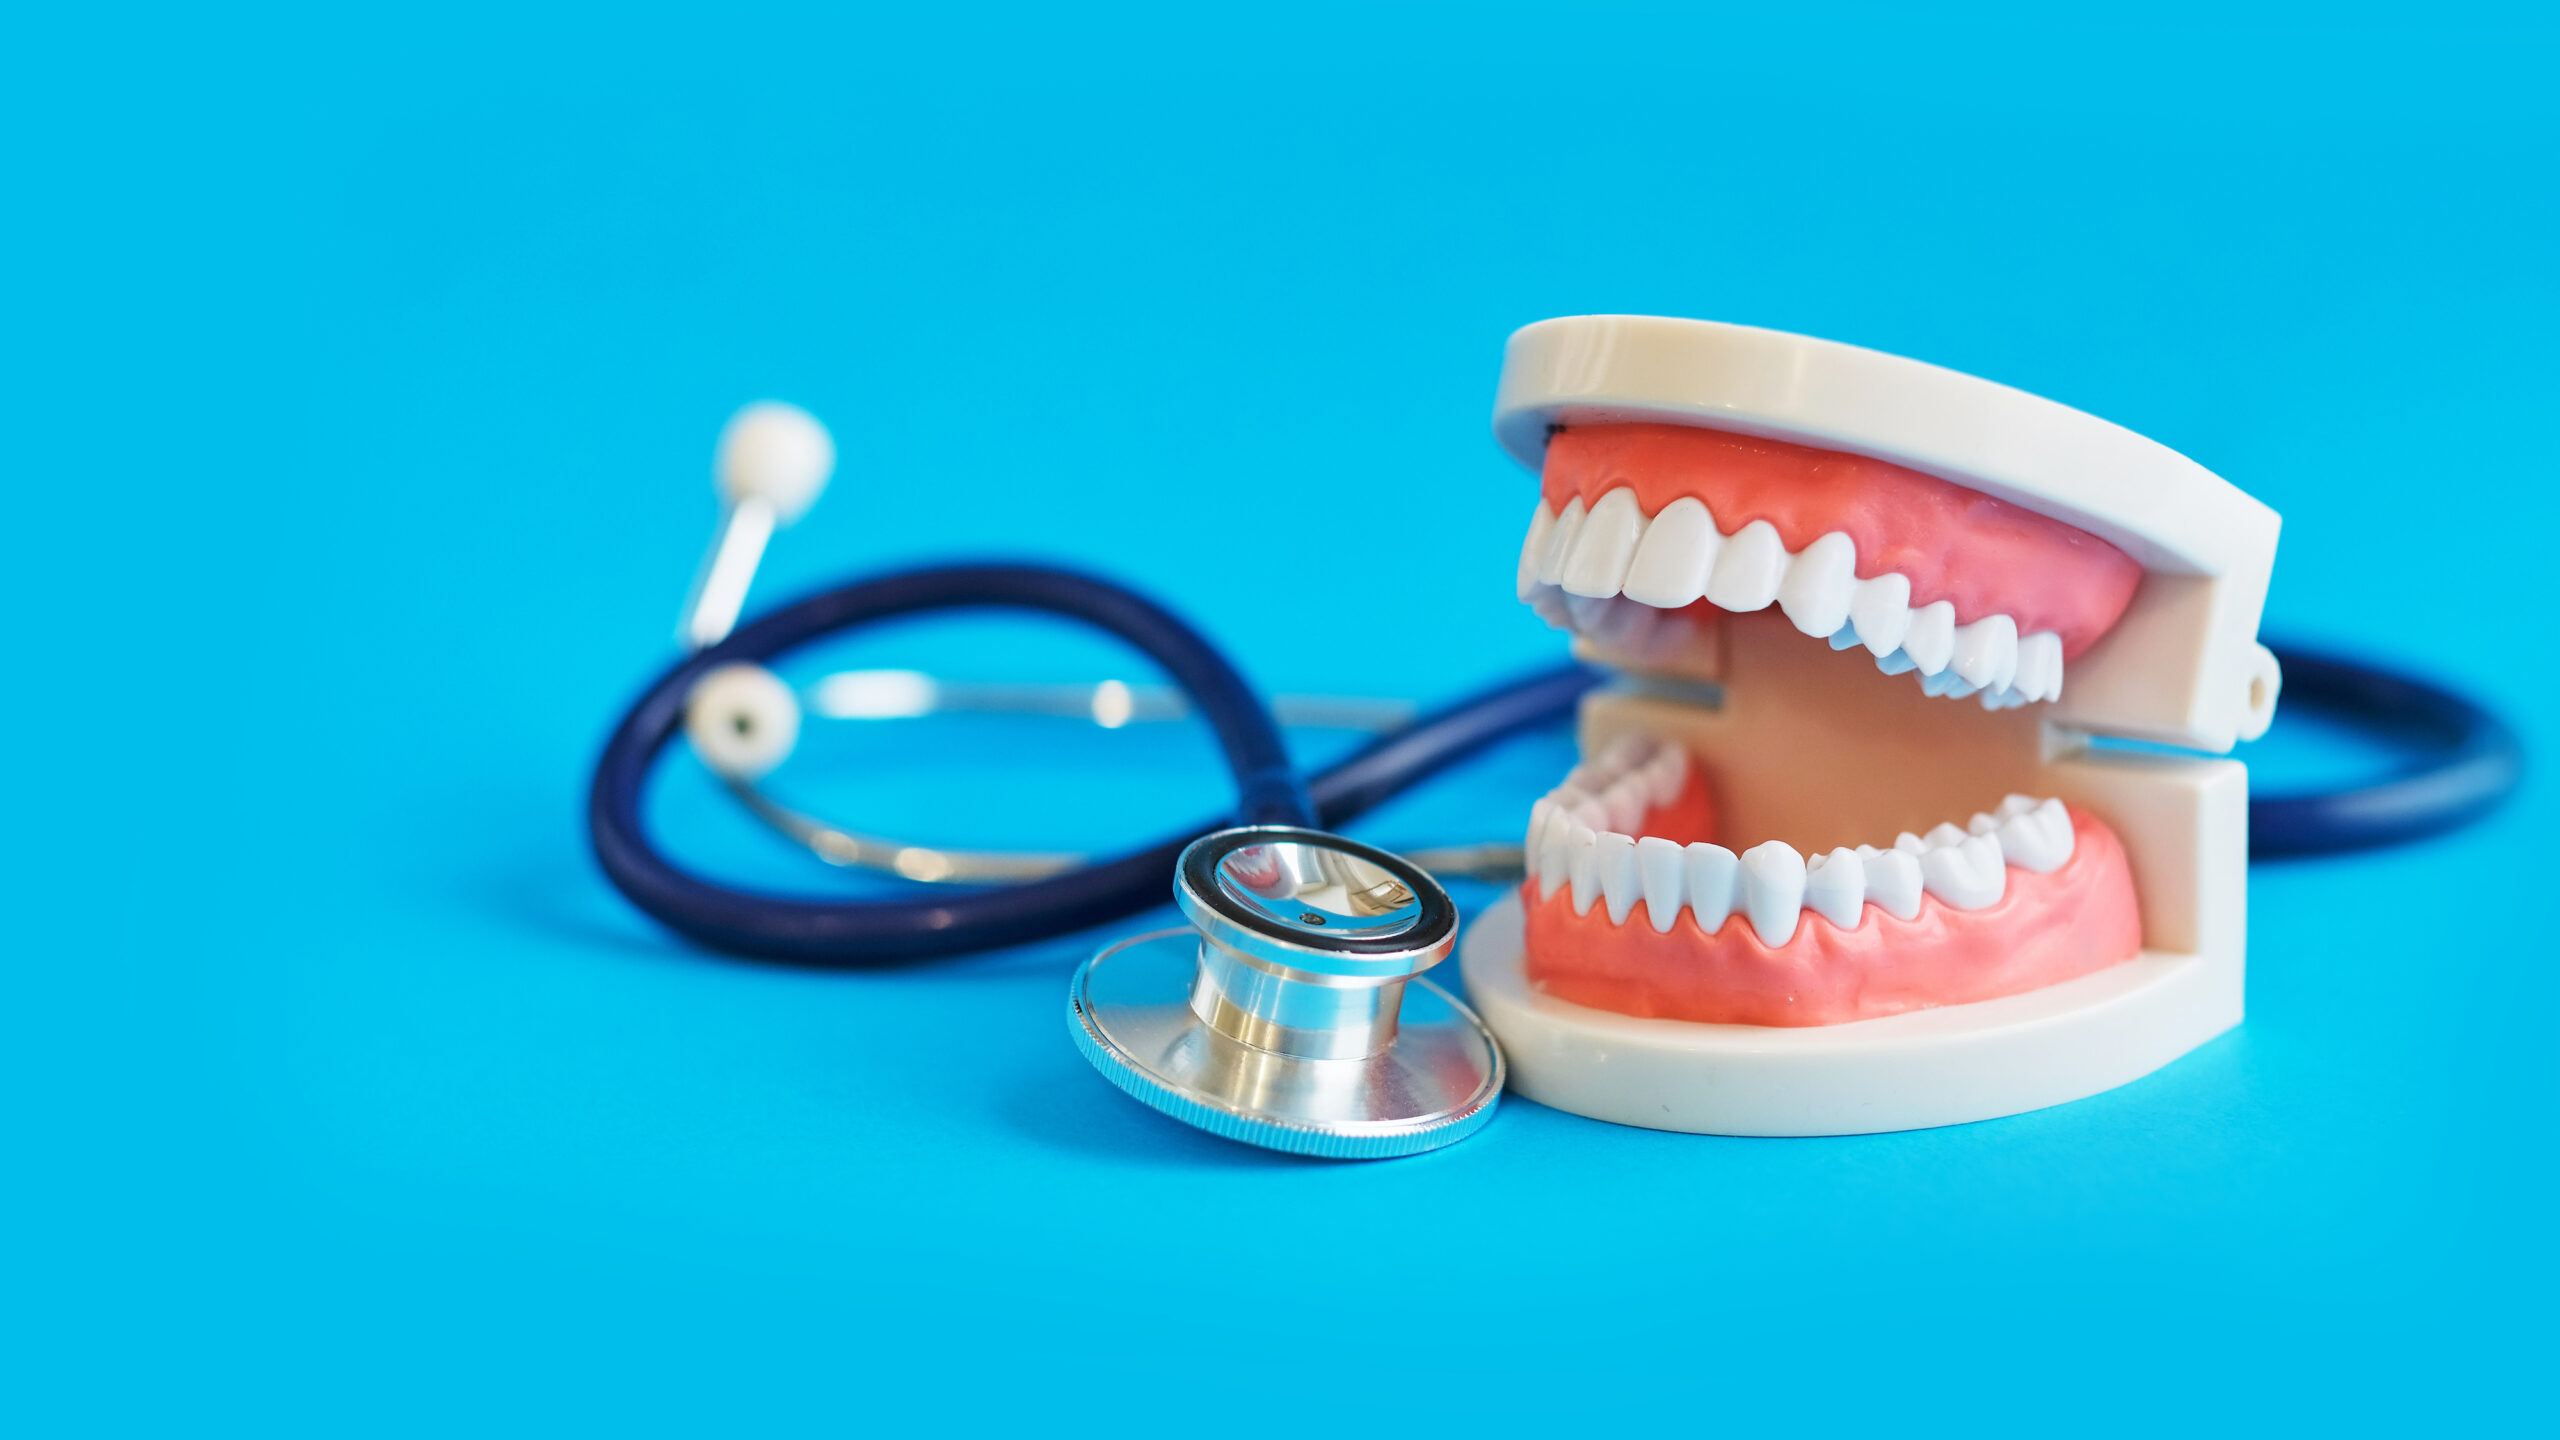 White teeth model and stethoscope on blue background; tooth organ relationship